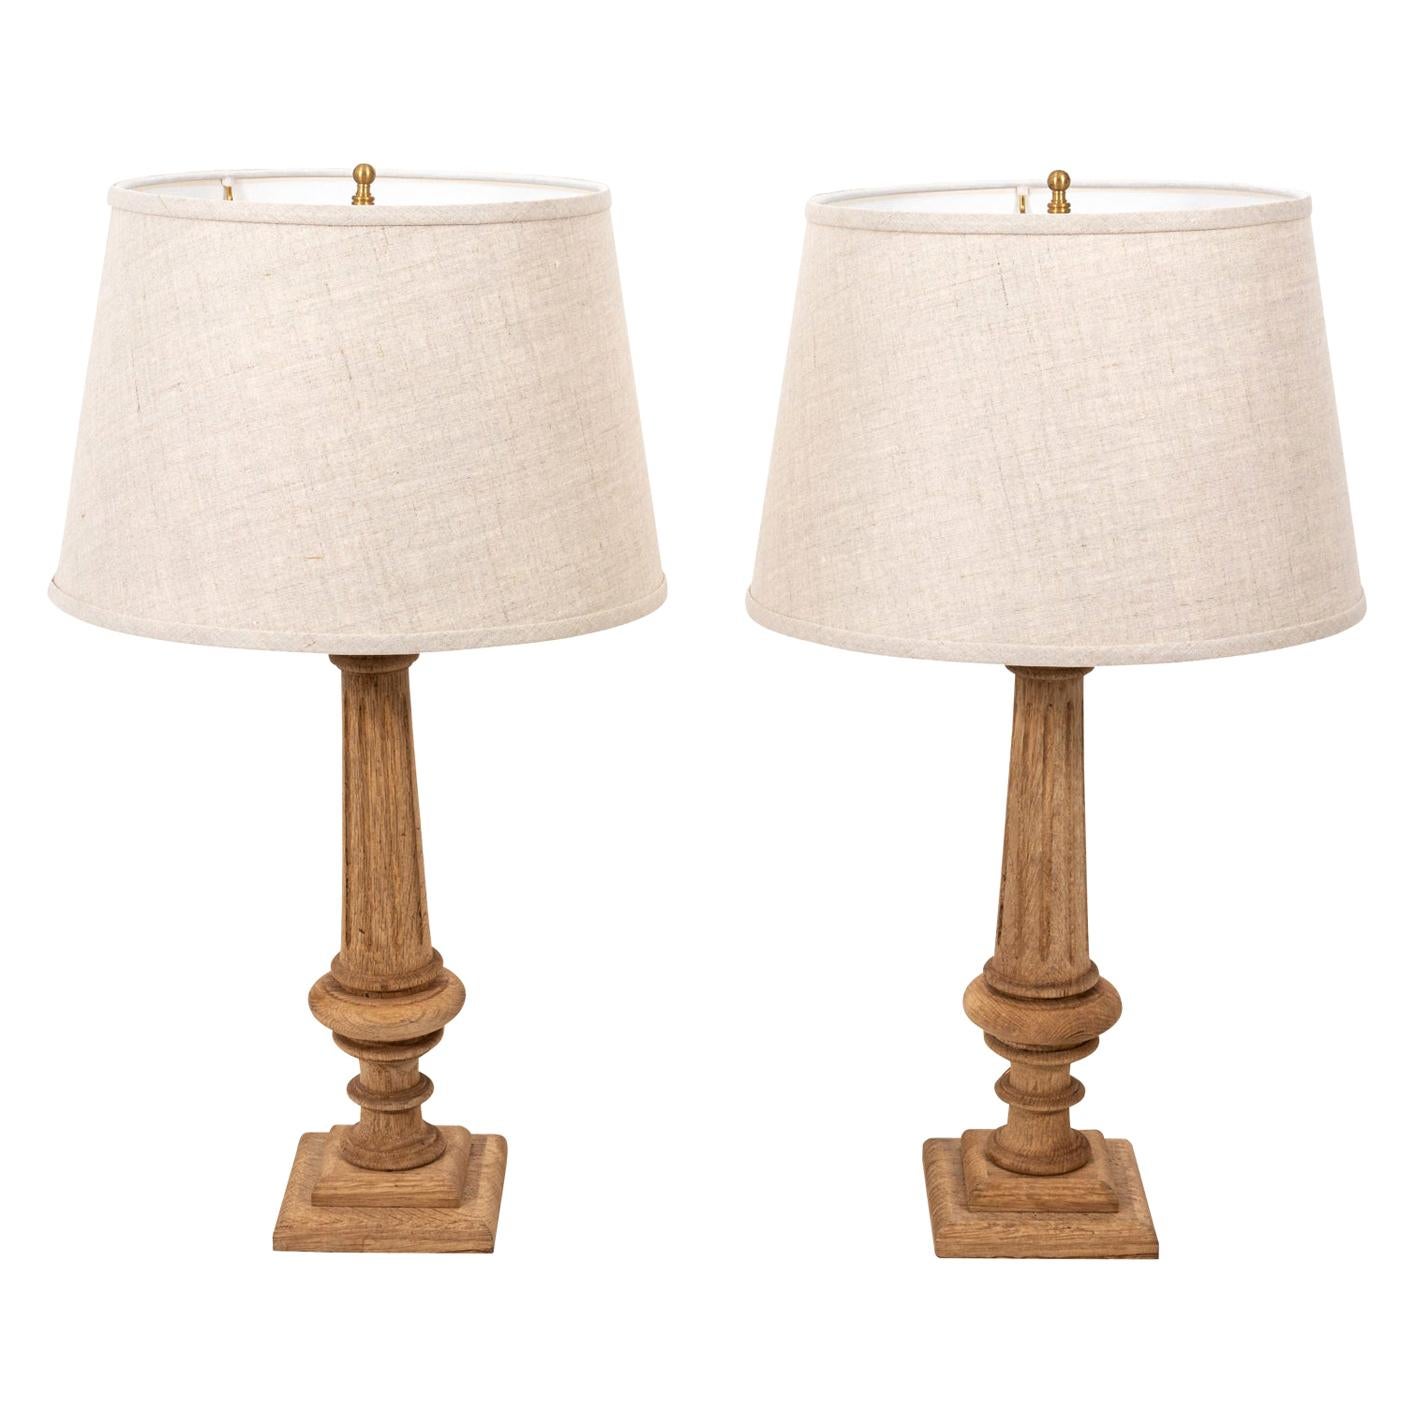 Pair of Bleached Wood Table Lamps